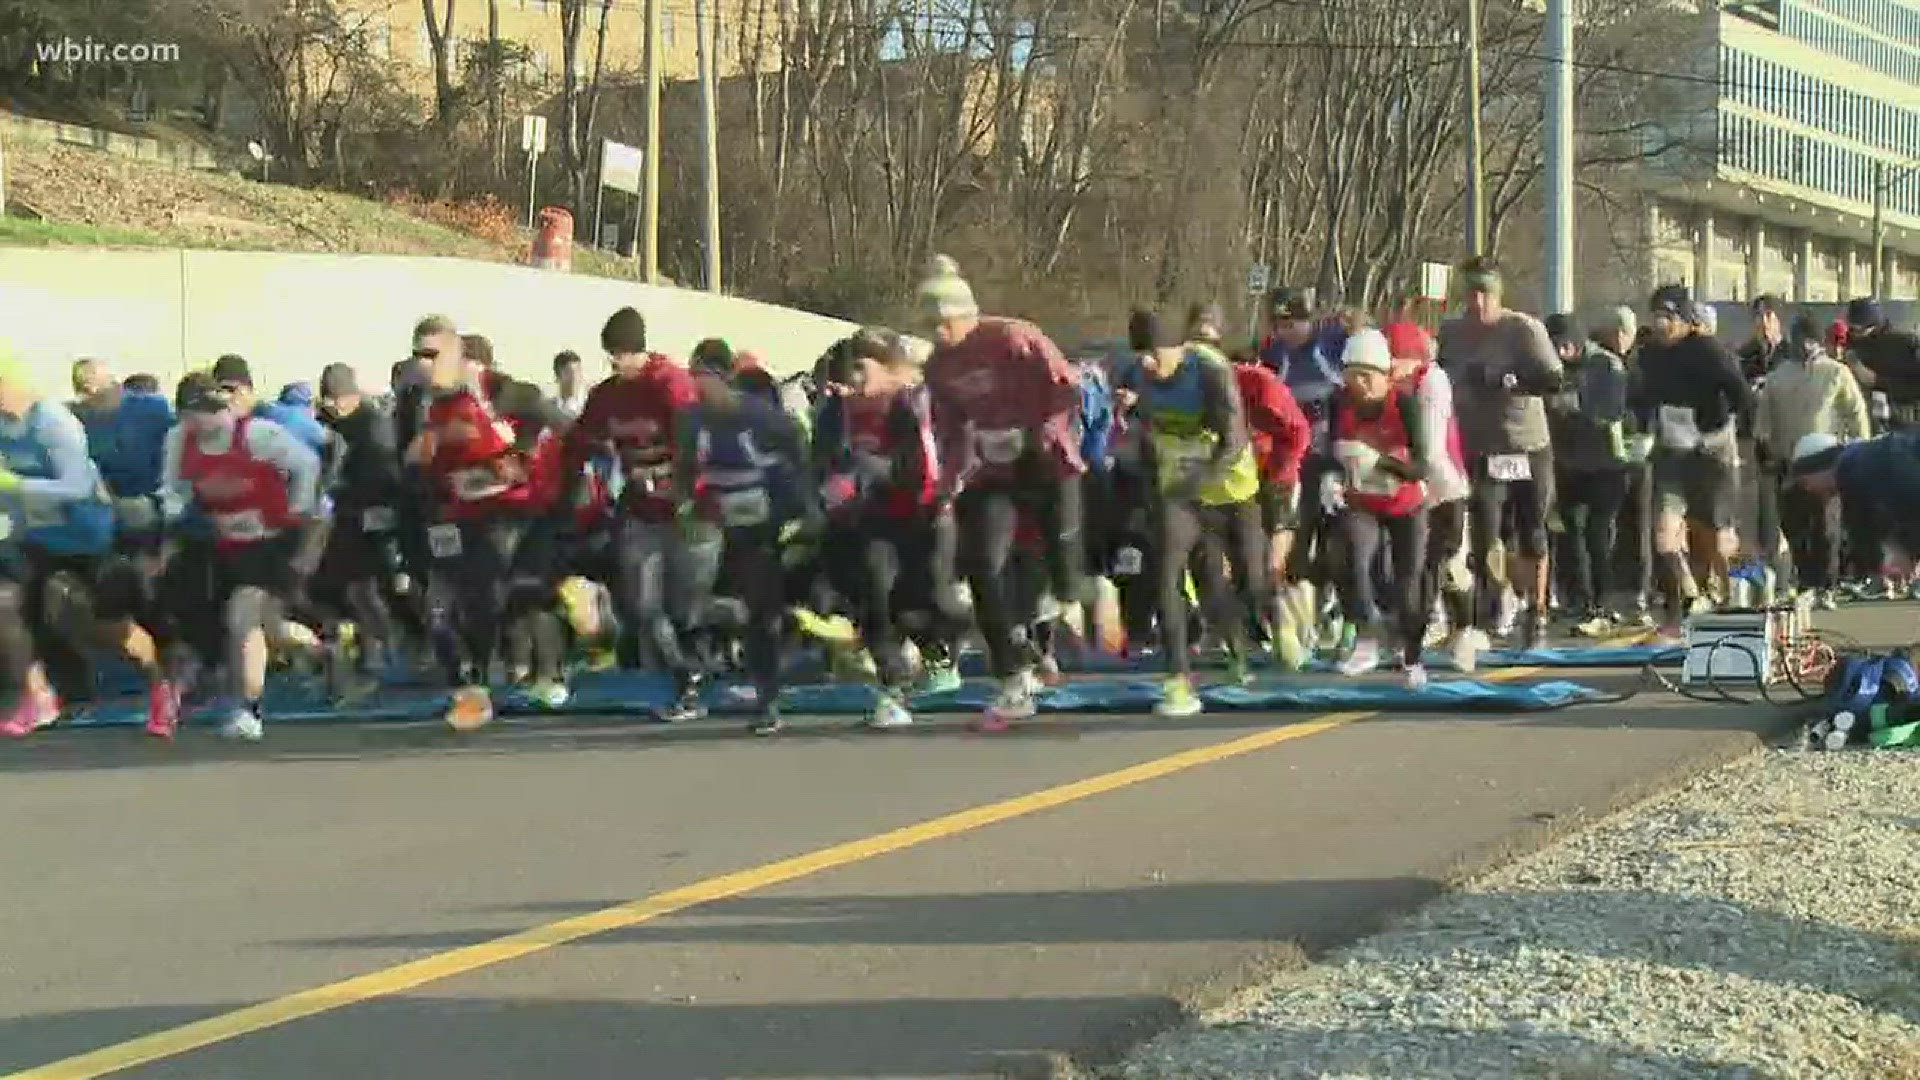 Jan. 1, 2018: Hundreds of runners stepped up to the line for the Calhoun's New Year's Day 5K.